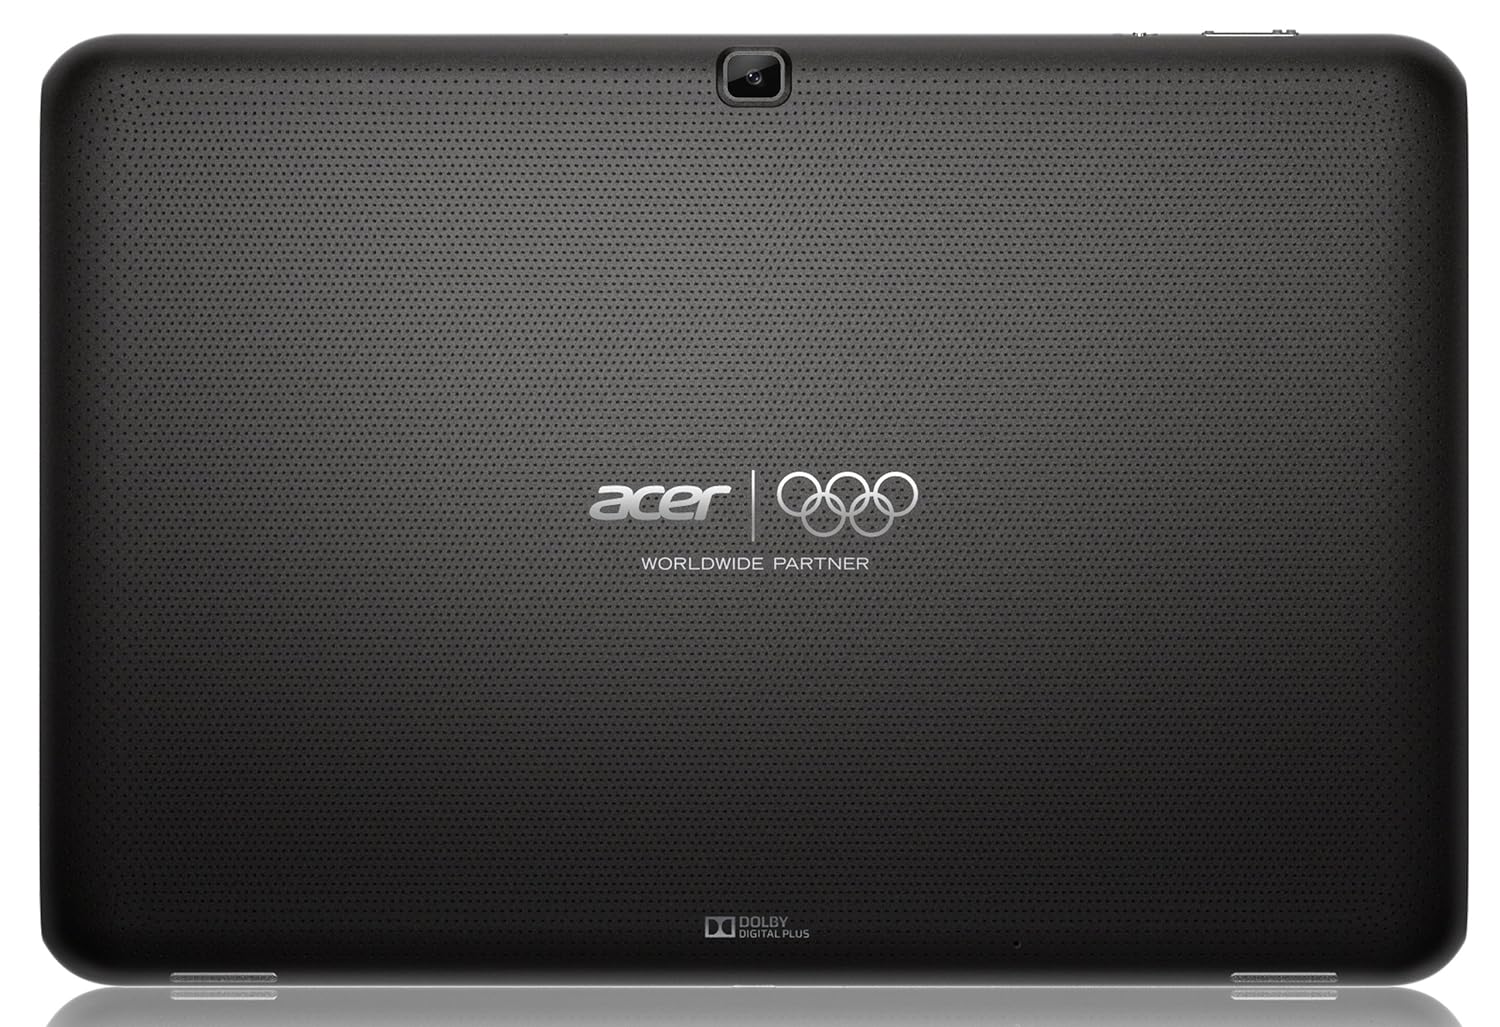 Acer Iconia A510 25,7 cm (10,1 Zoll) Tablet-PC